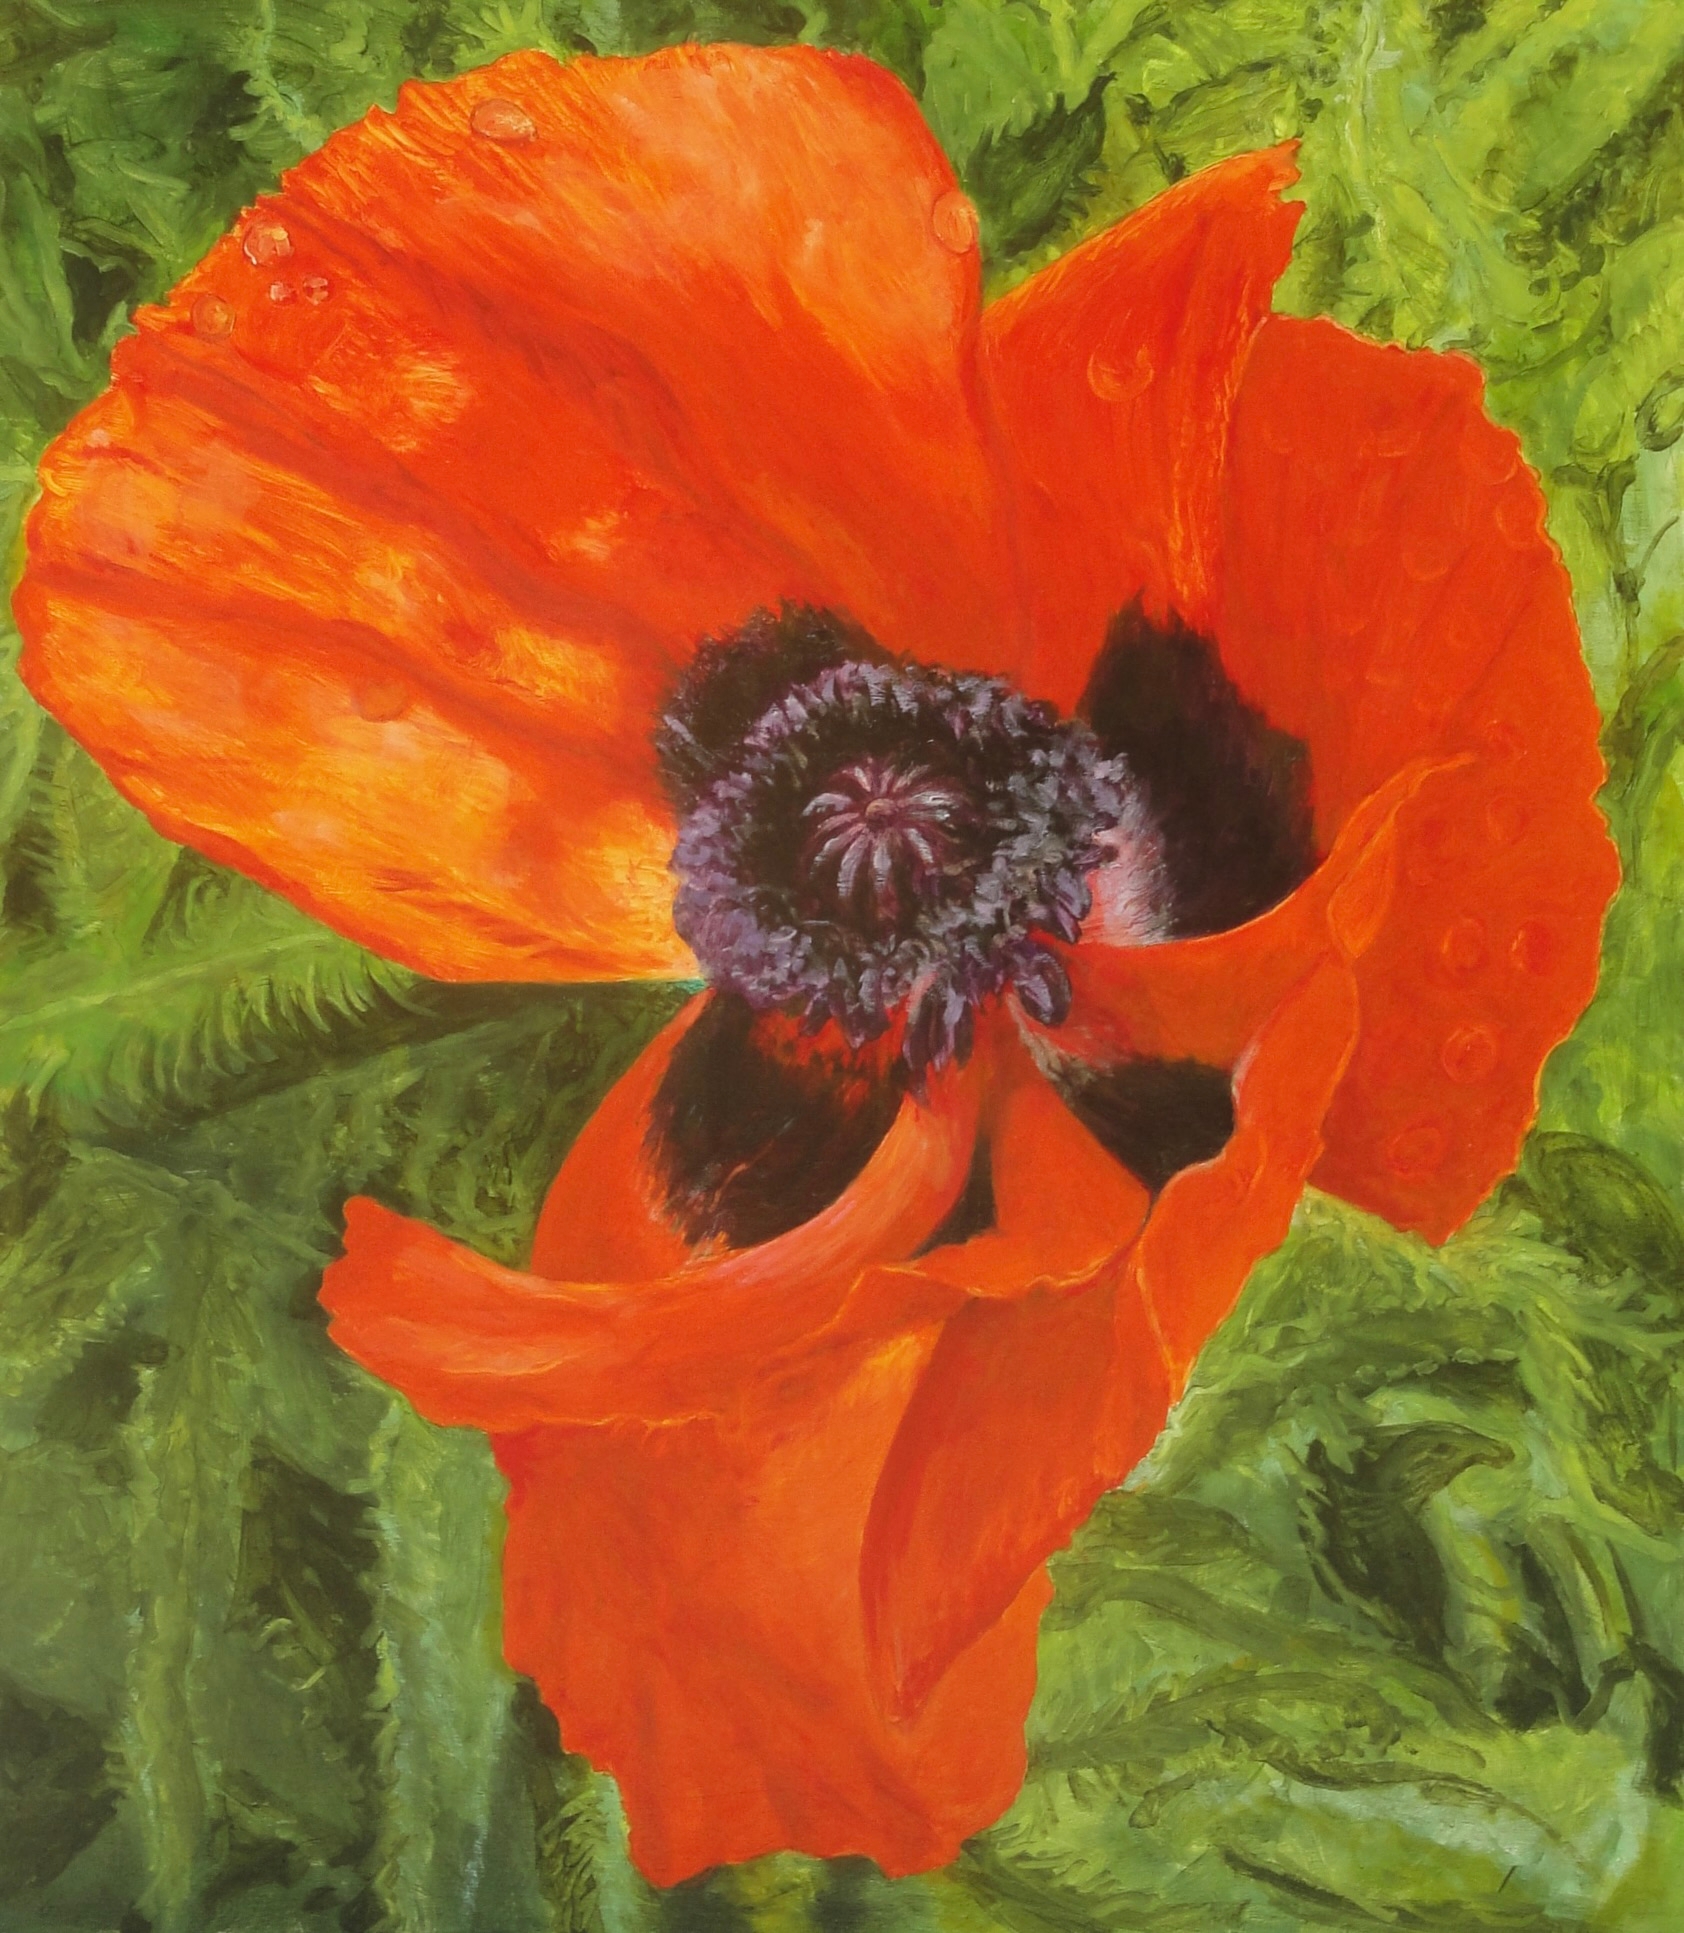 Donald Shambroom's painting from the Collection called Blossom depicting a Poppy